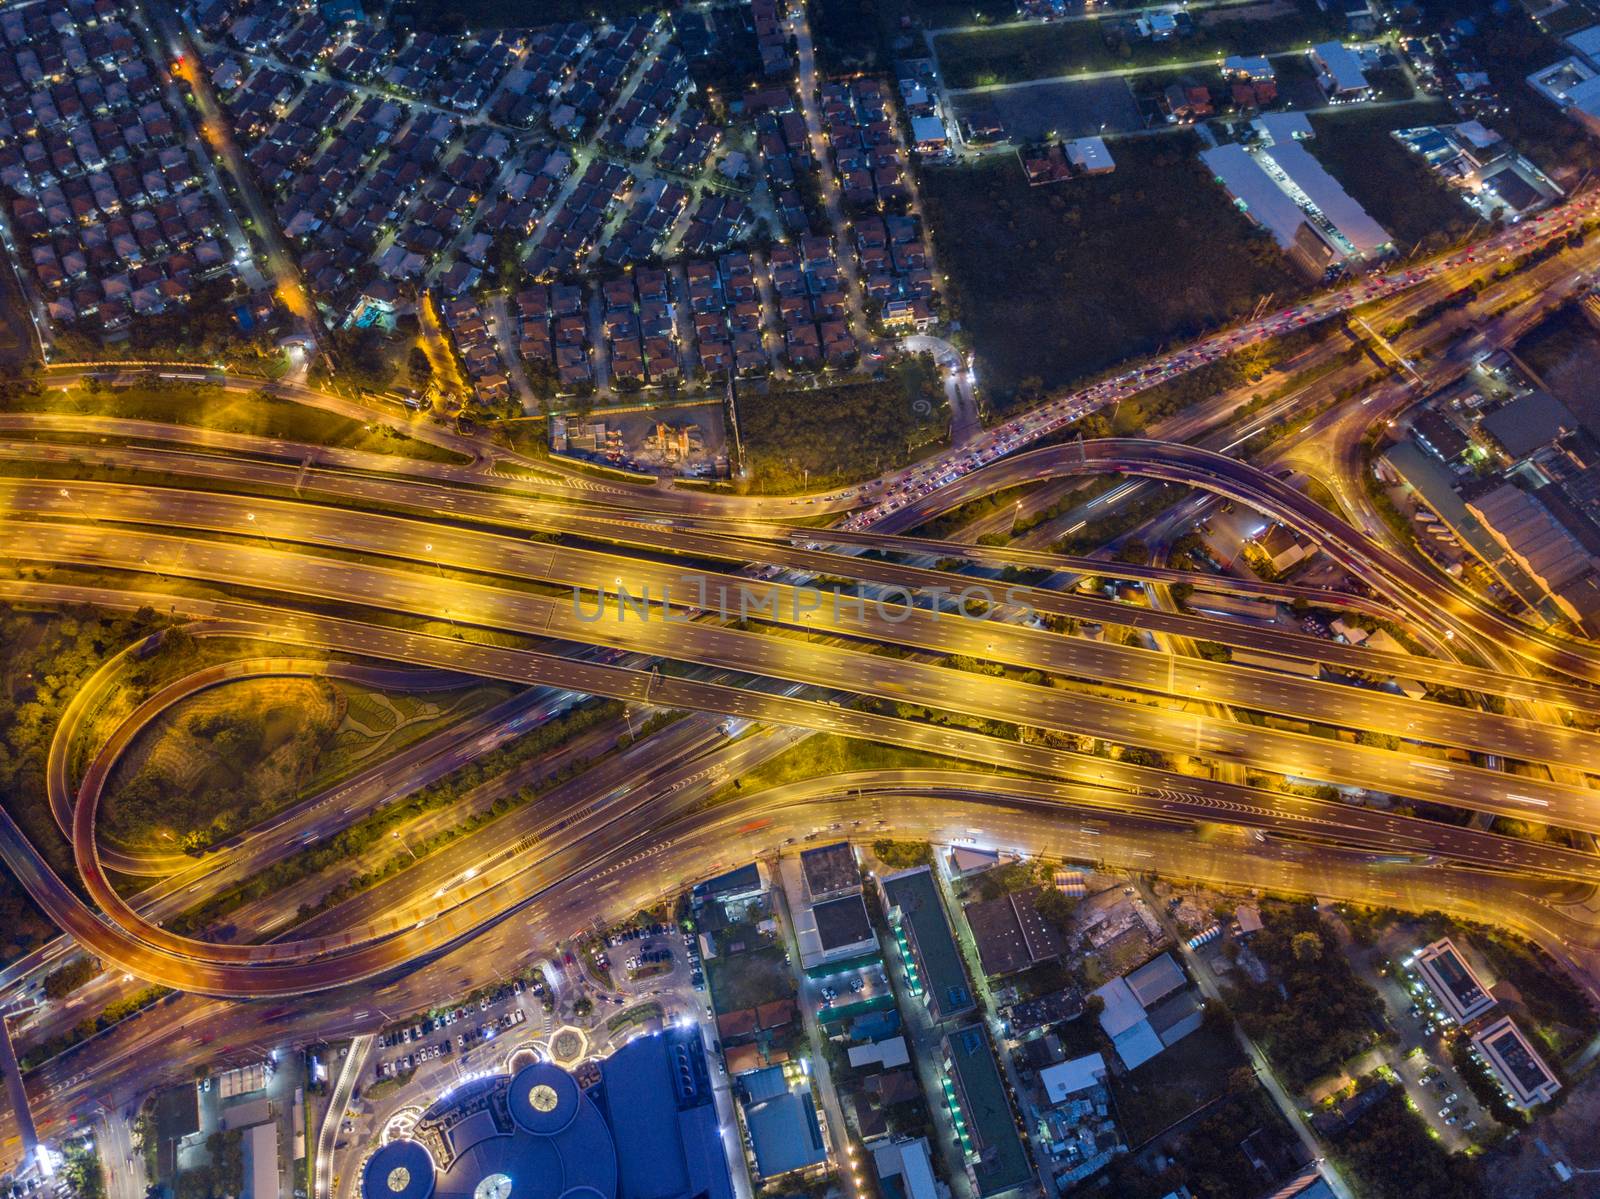 Aerial view of expressway at night by antpkr